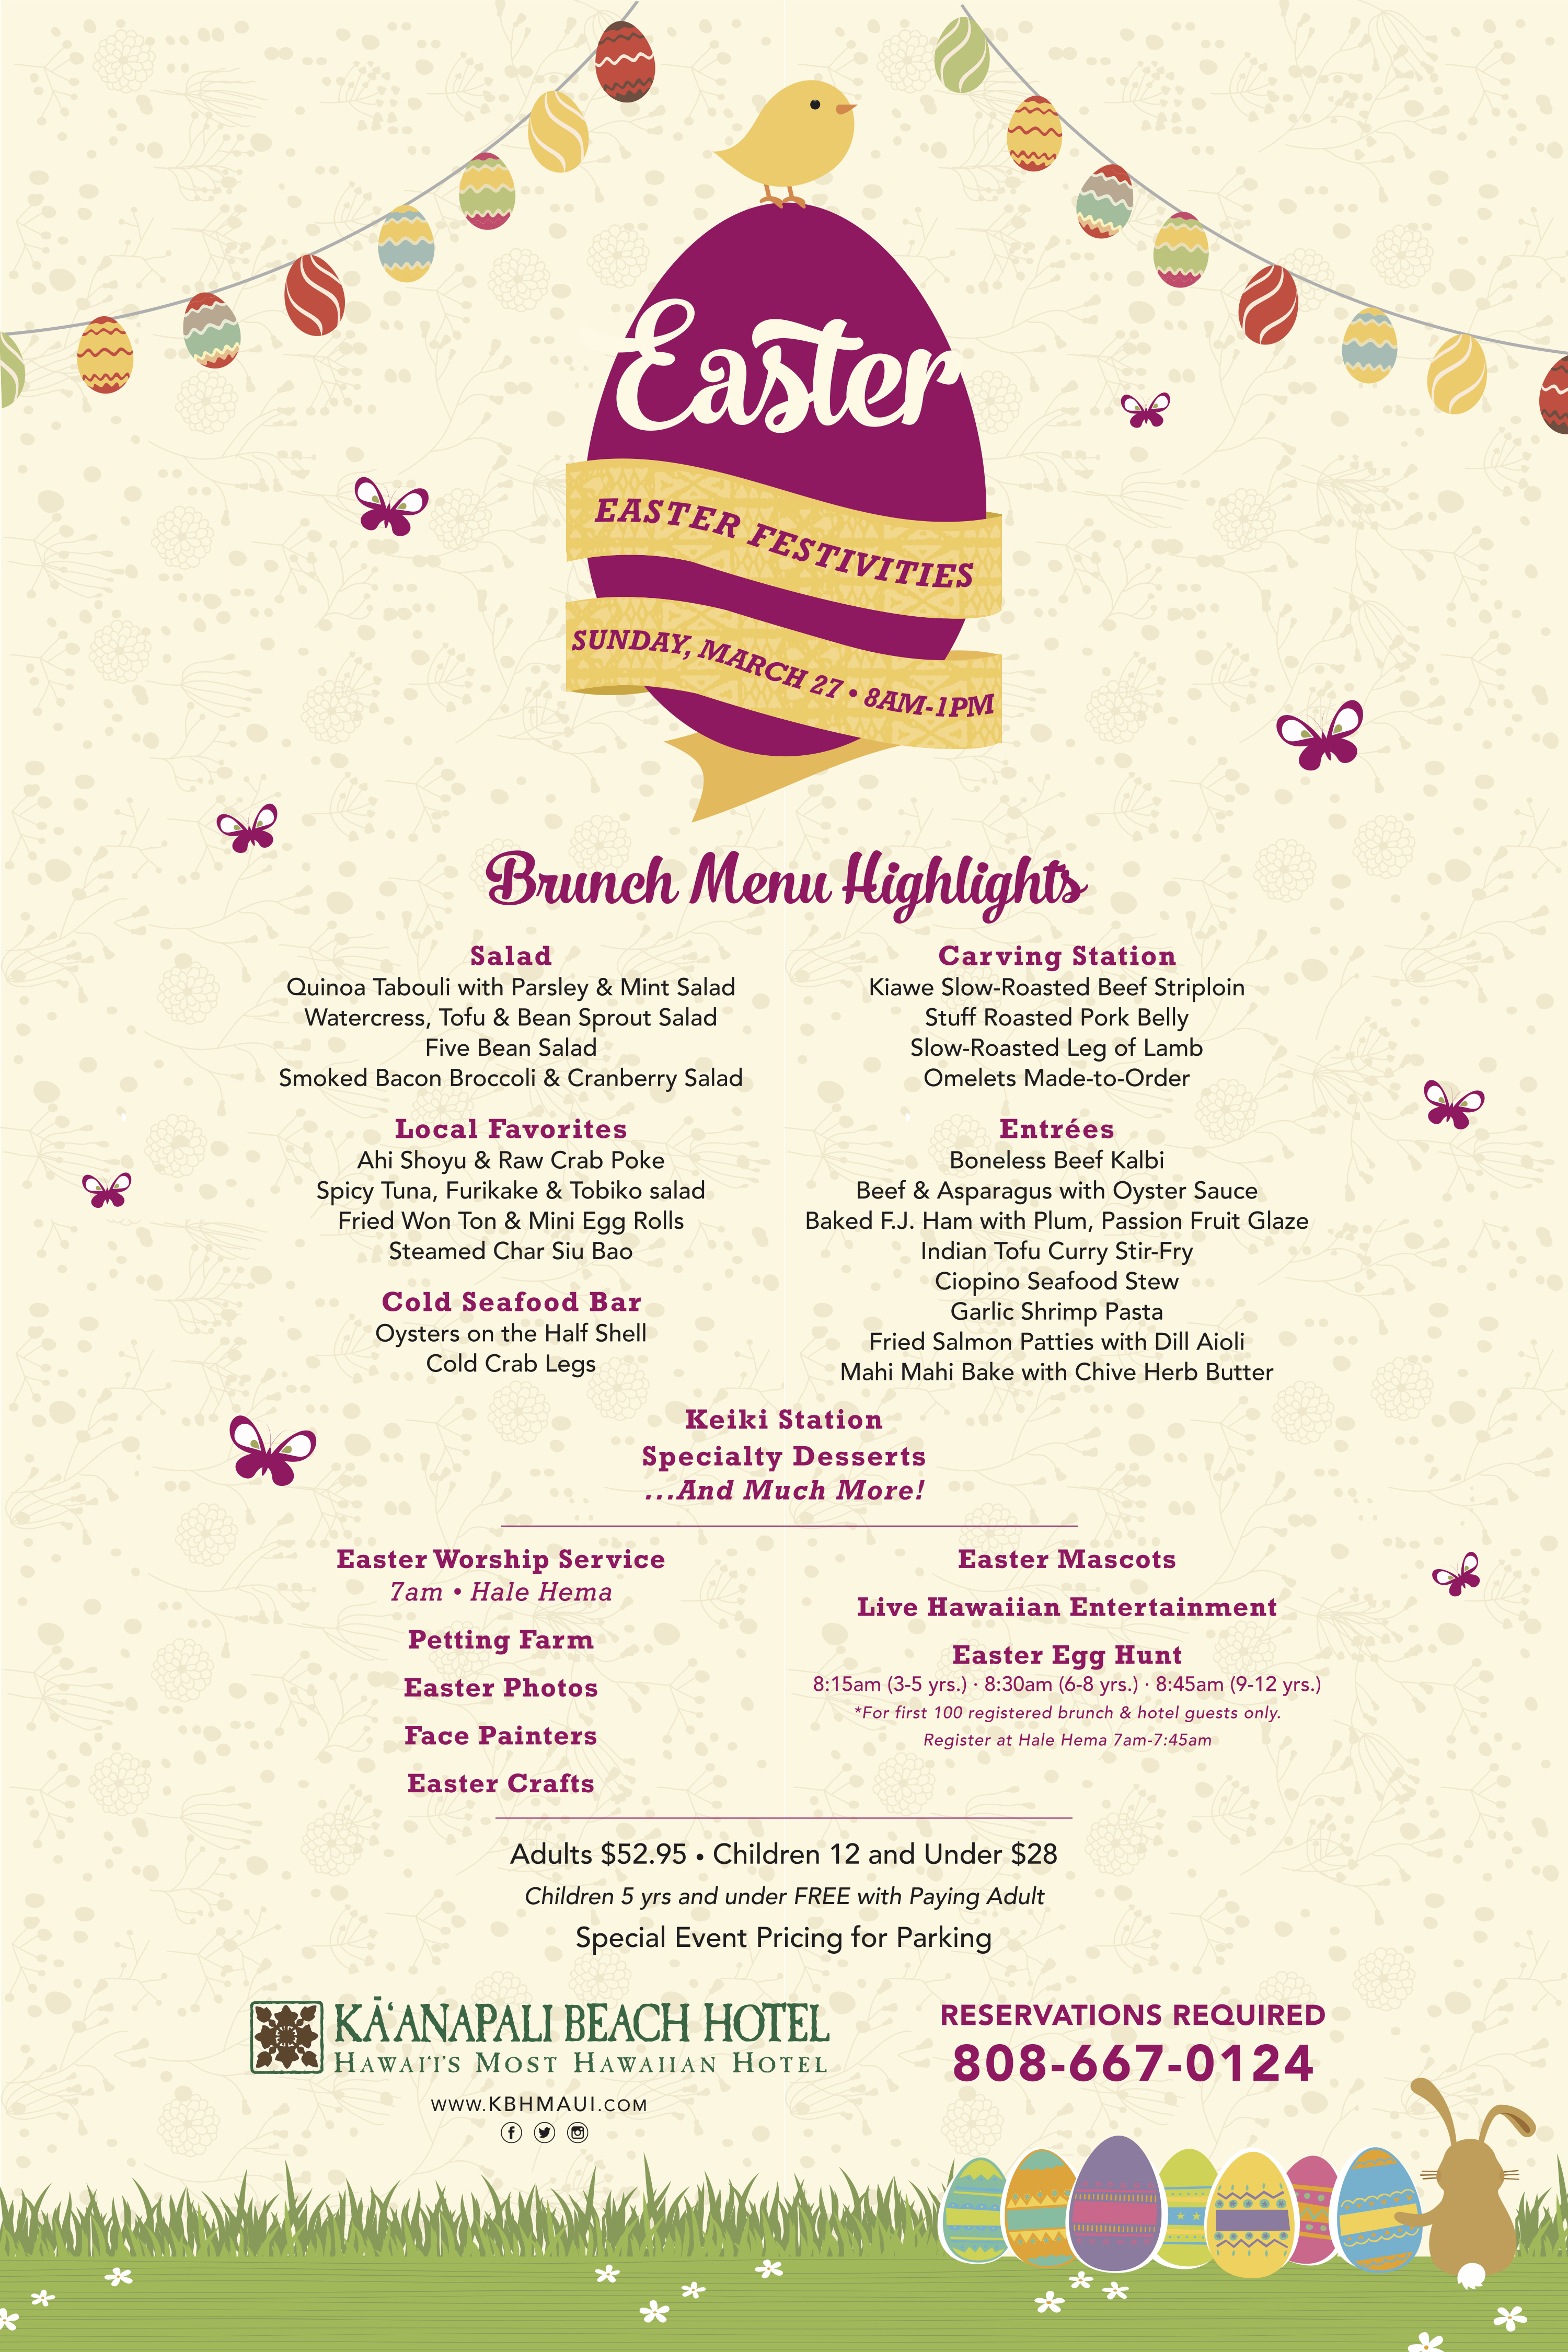 Easter brunch event at Kā‘anapali Beach Hotel. Courtesy image.